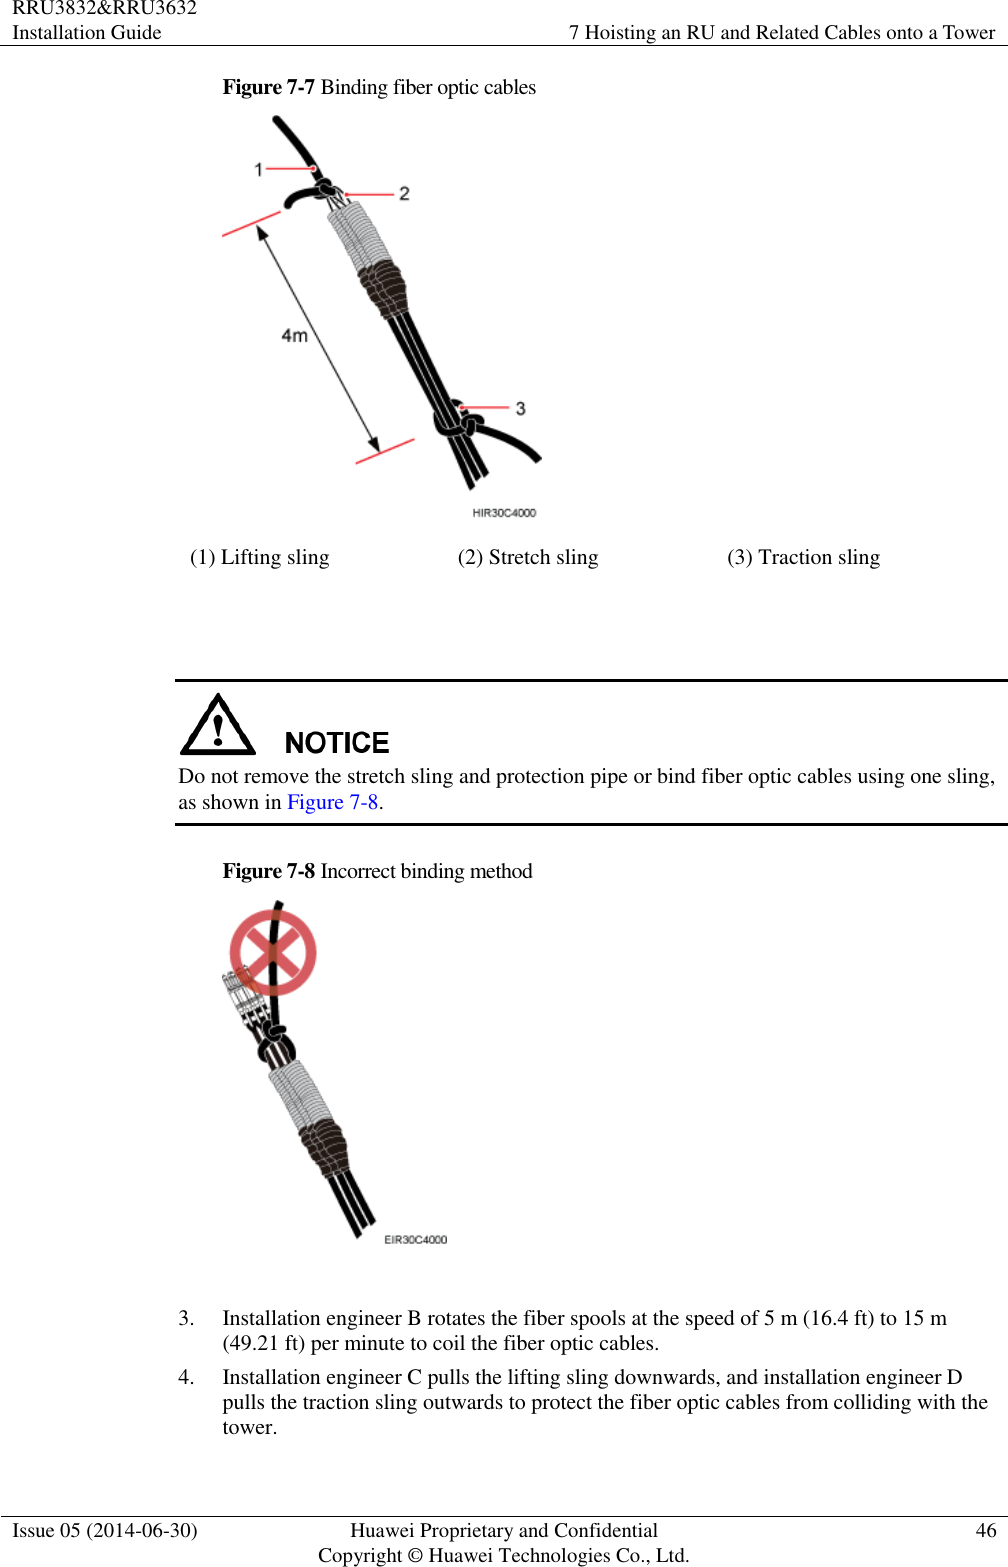 RRU3832&amp;RRU3632 Installation Guide 7 Hoisting an RU and Related Cables onto a Tower  Issue 05 (2014-06-30) Huawei Proprietary and Confidential                                     Copyright © Huawei Technologies Co., Ltd. 46  Figure 7-7 Binding fiber optic cables  (1) Lifting sling (2) Stretch sling (3) Traction sling    Do not remove the stretch sling and protection pipe or bind fiber optic cables using one sling, as shown in Figure 7-8. Figure 7-8 Incorrect binding method   3. Installation engineer B rotates the fiber spools at the speed of 5 m (16.4 ft) to 15 m (49.21 ft) per minute to coil the fiber optic cables. 4. Installation engineer C pulls the lifting sling downwards, and installation engineer D pulls the traction sling outwards to protect the fiber optic cables from colliding with the tower. 